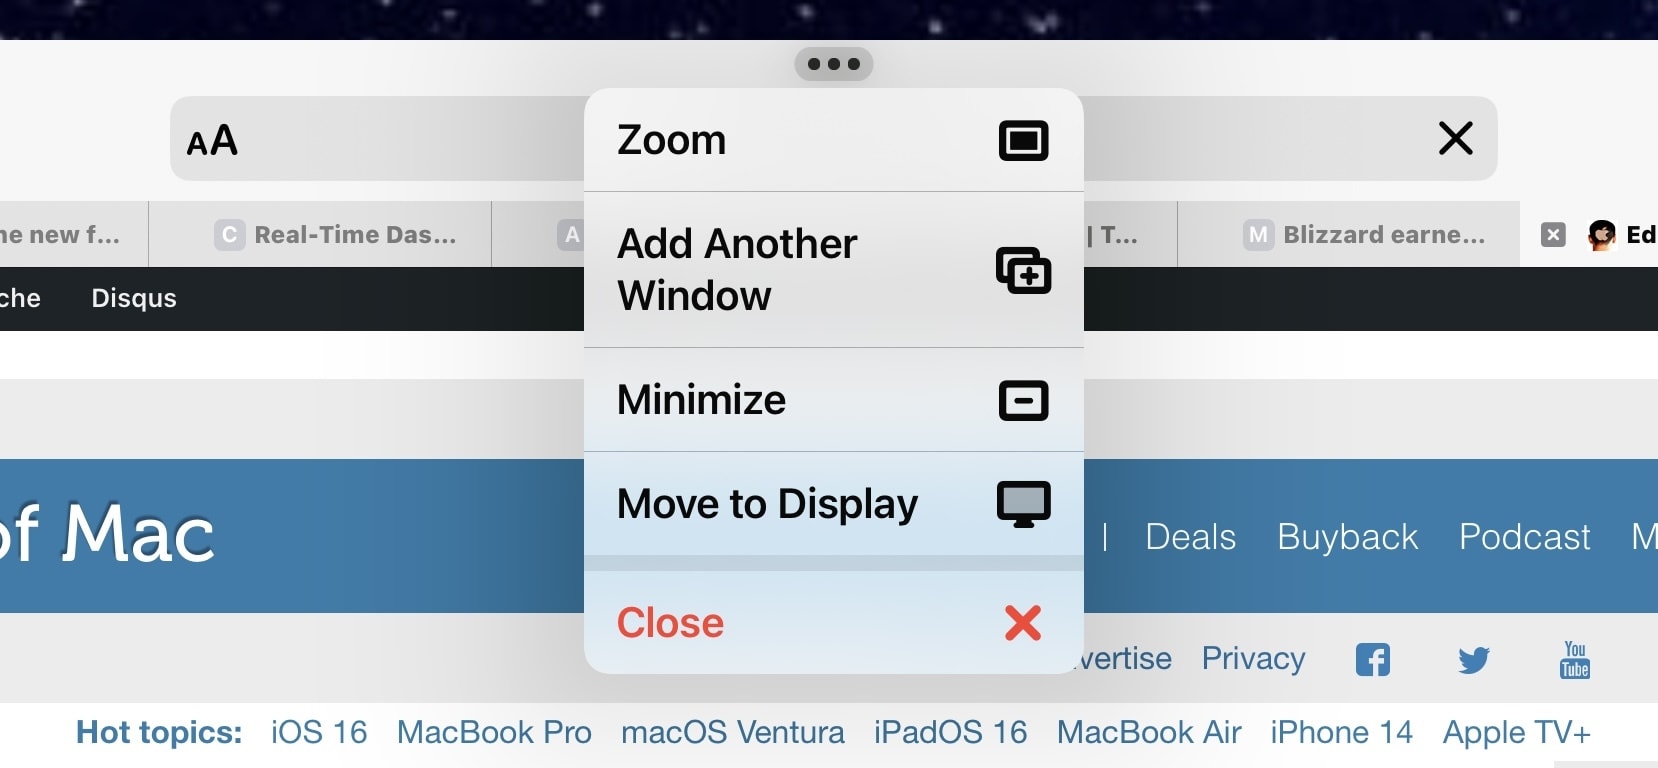 Multitasking options are now labeled in iPadOS 16 beta 3.